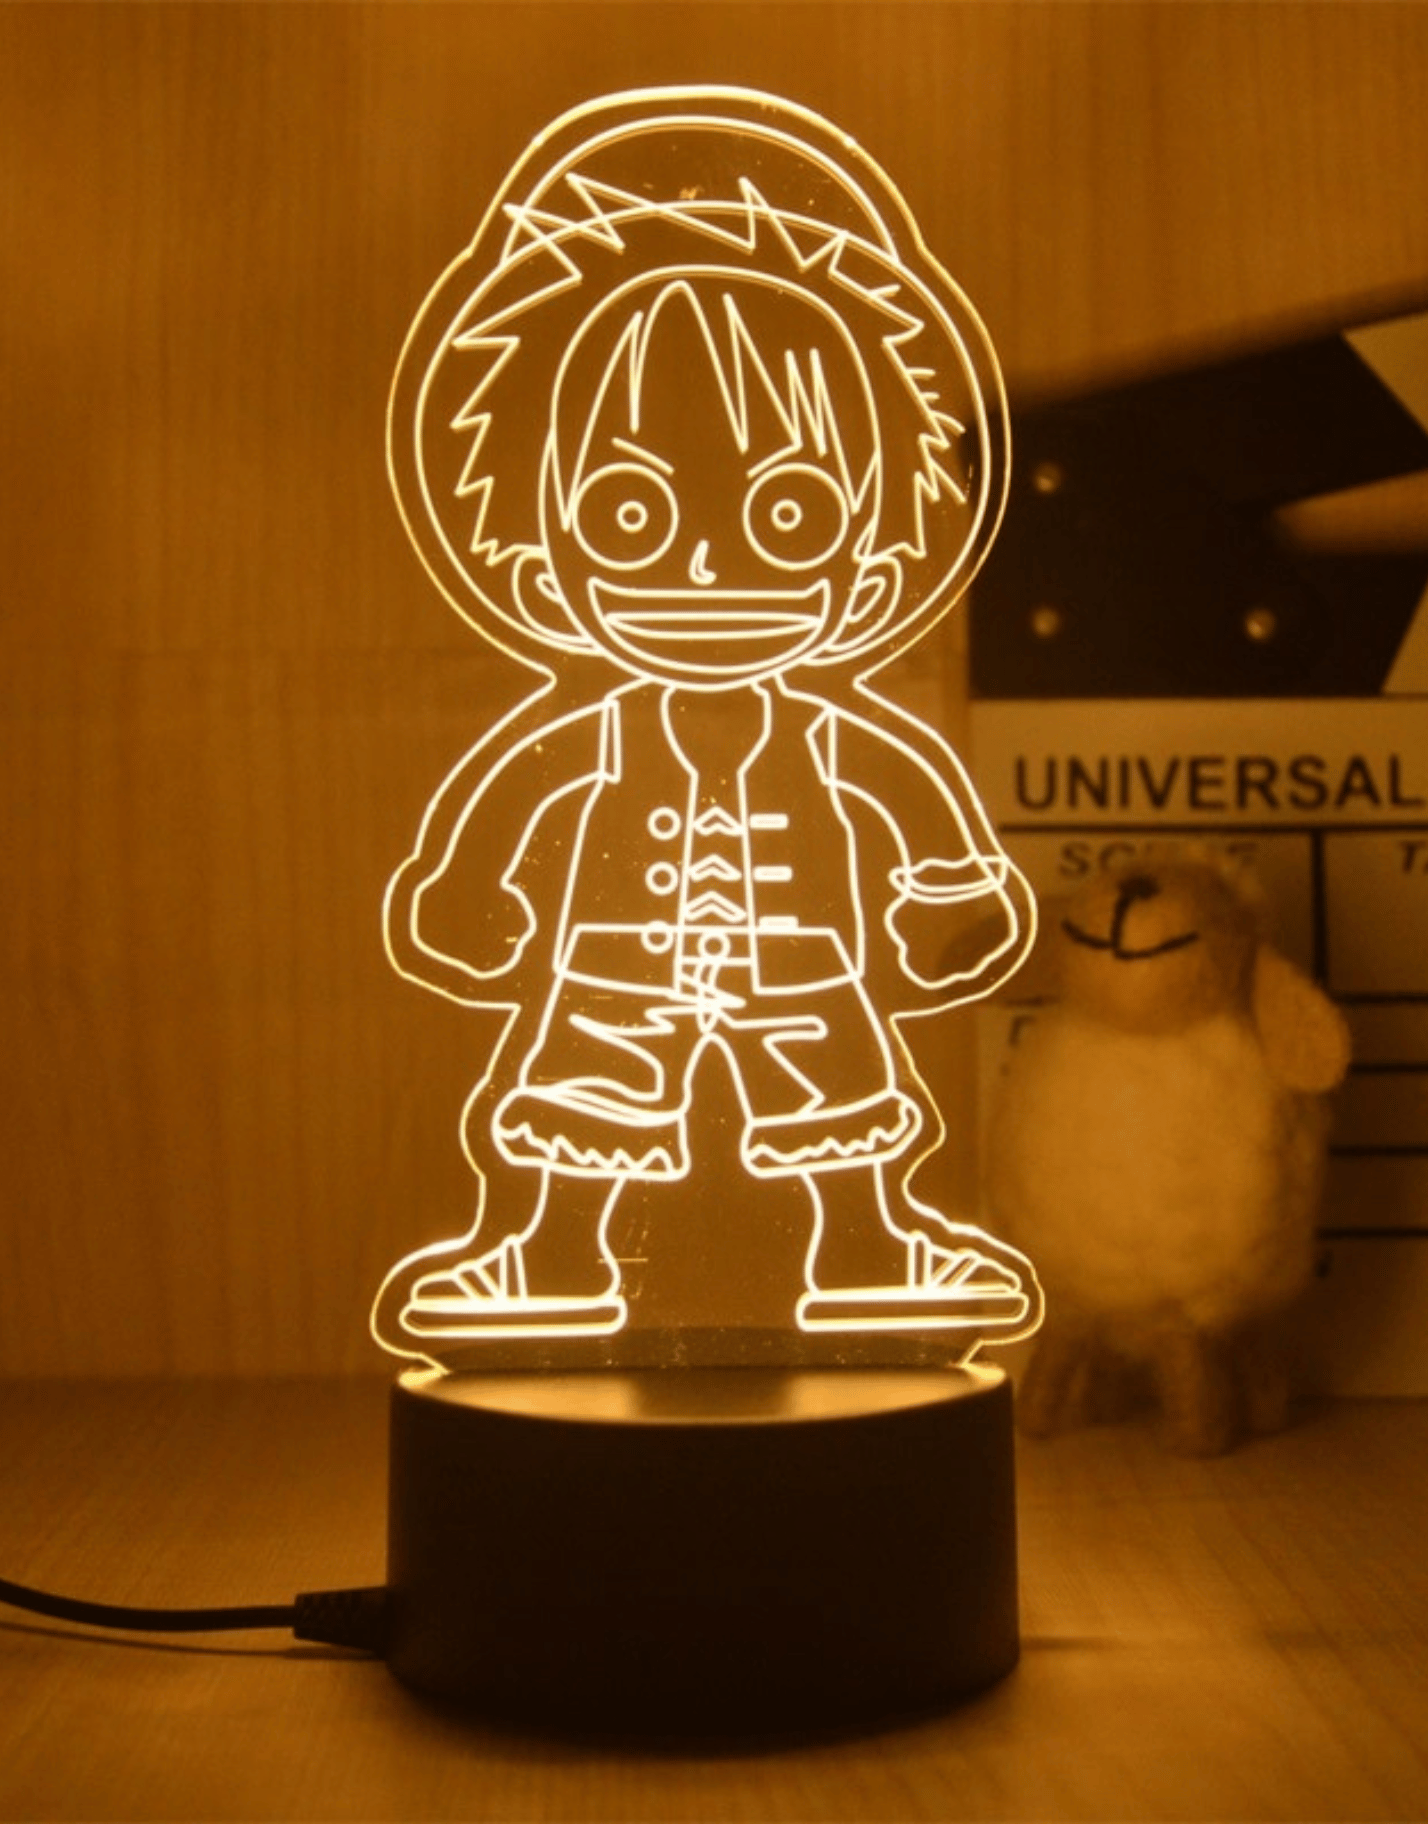 lampe one piece